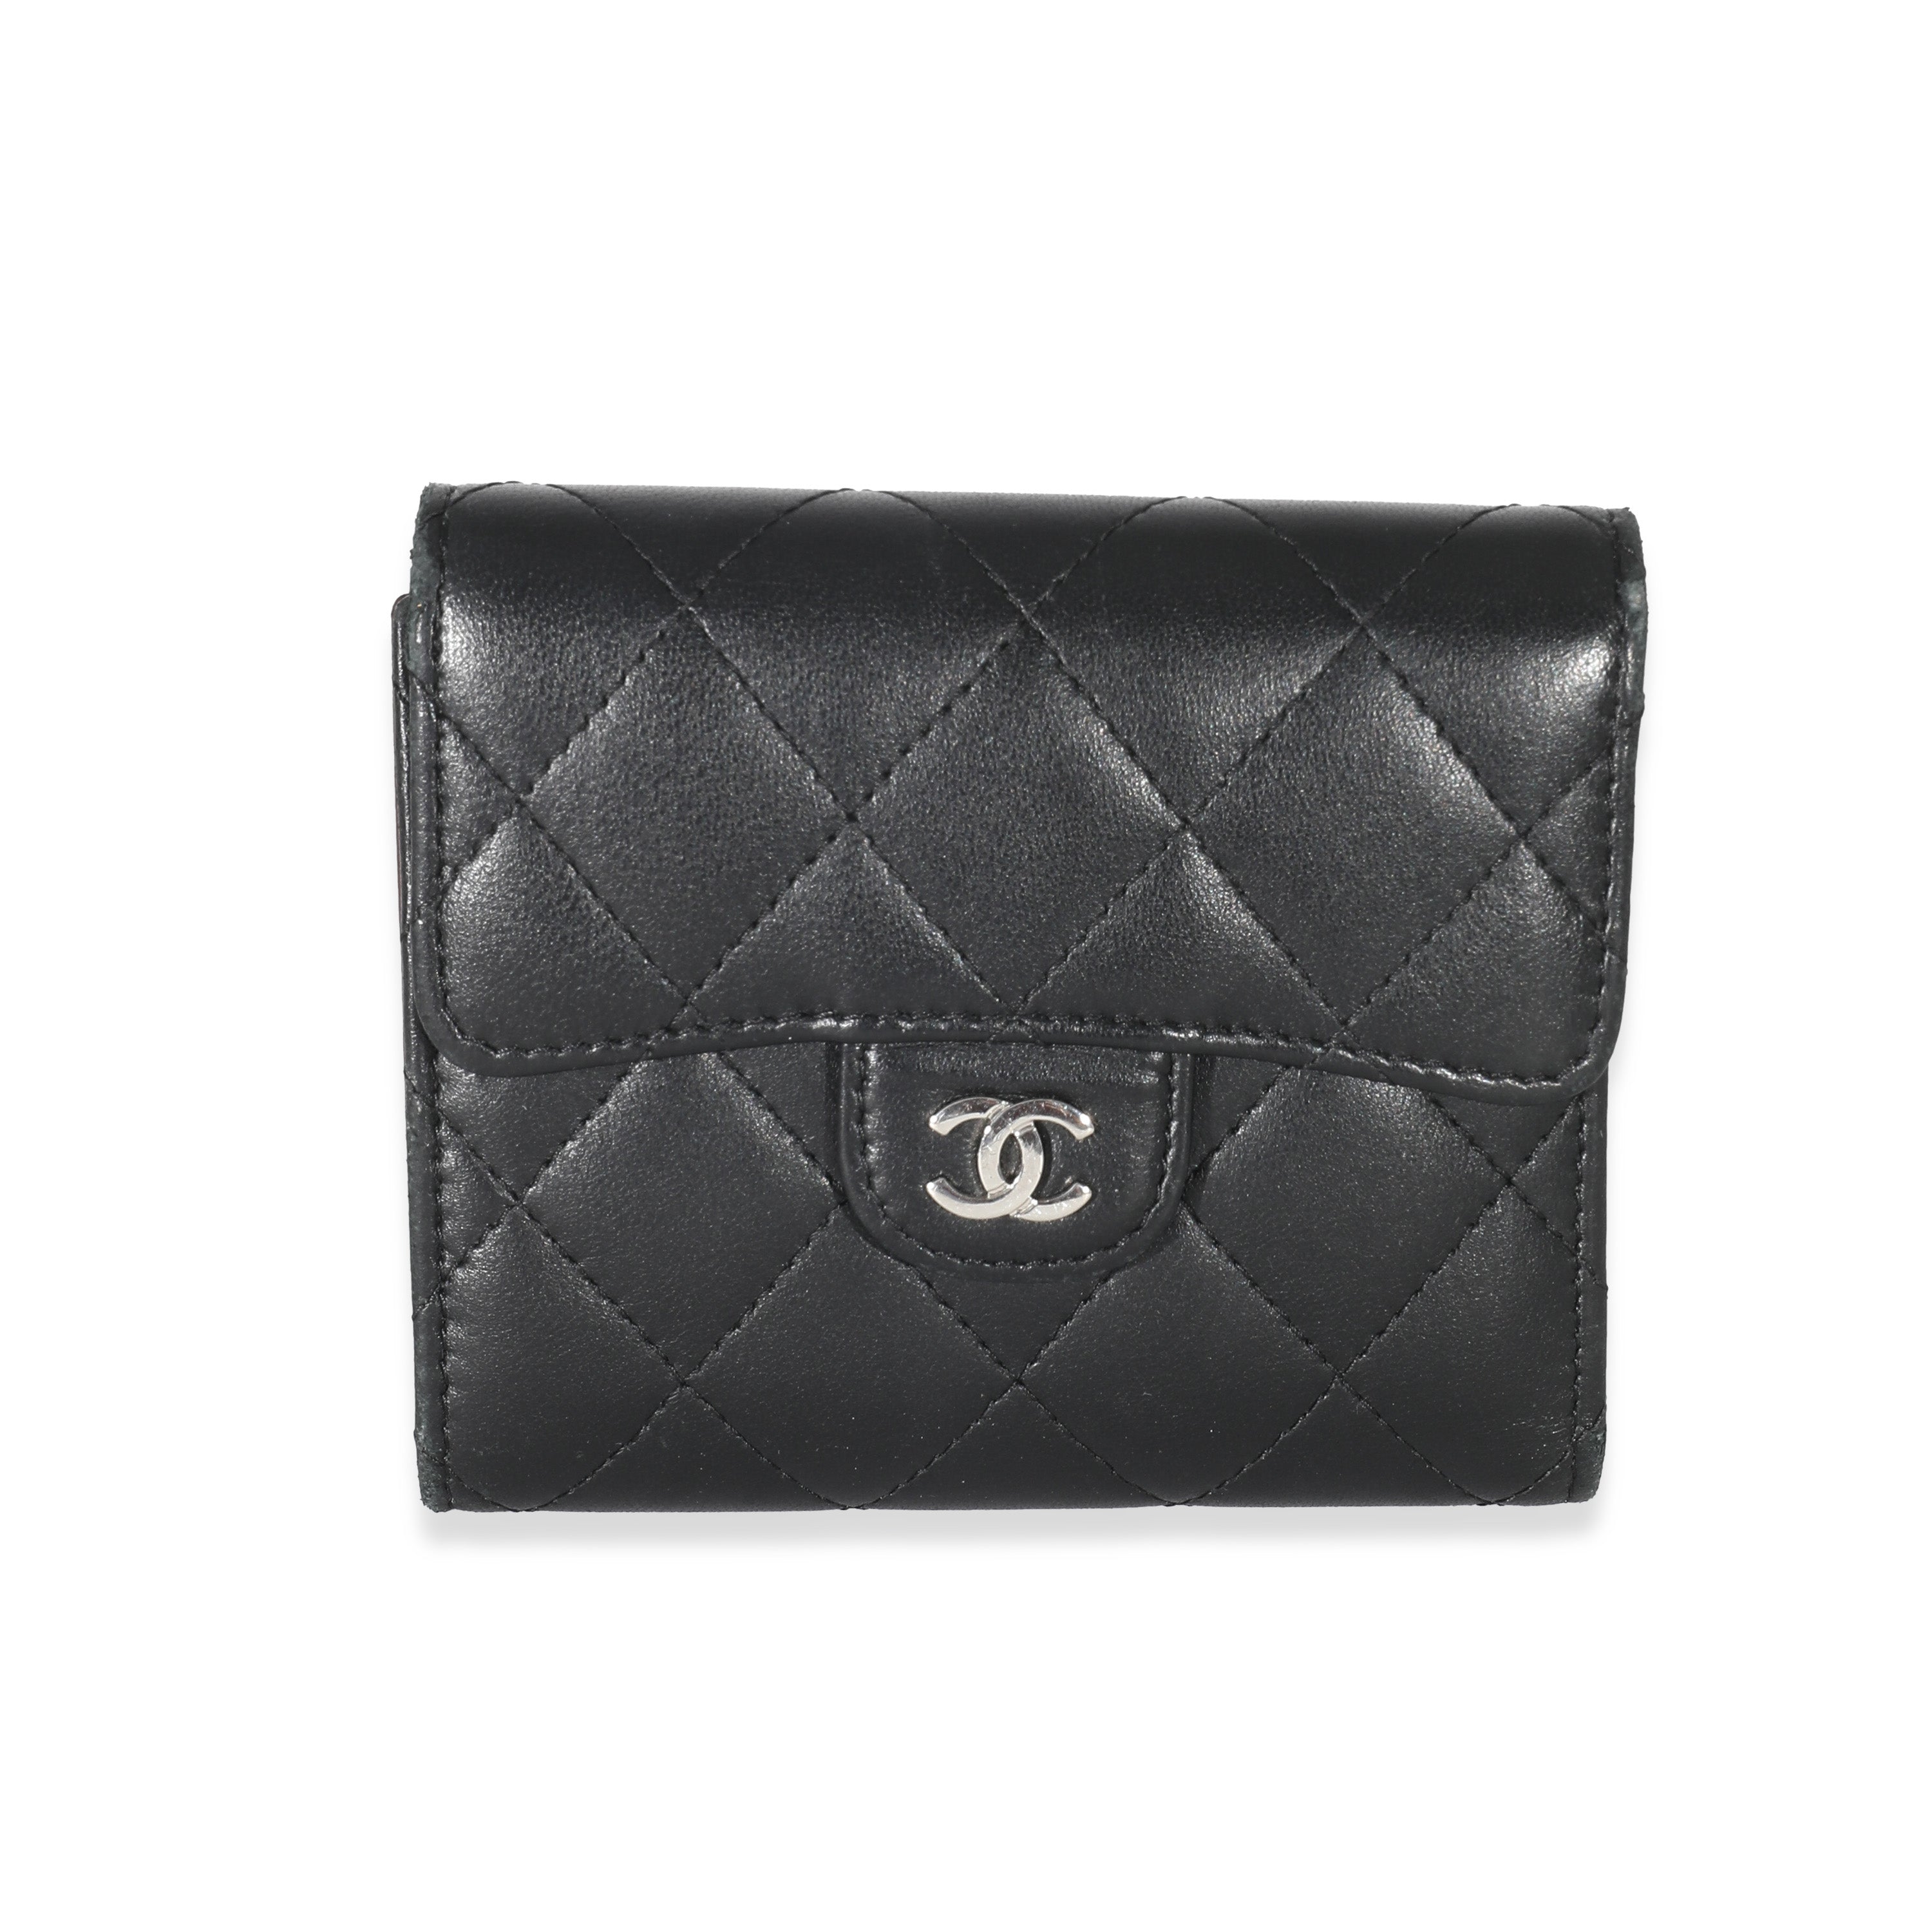 Chanel Black Quilted Lambskin Classic Small Flap Wallet, myGemma, CA